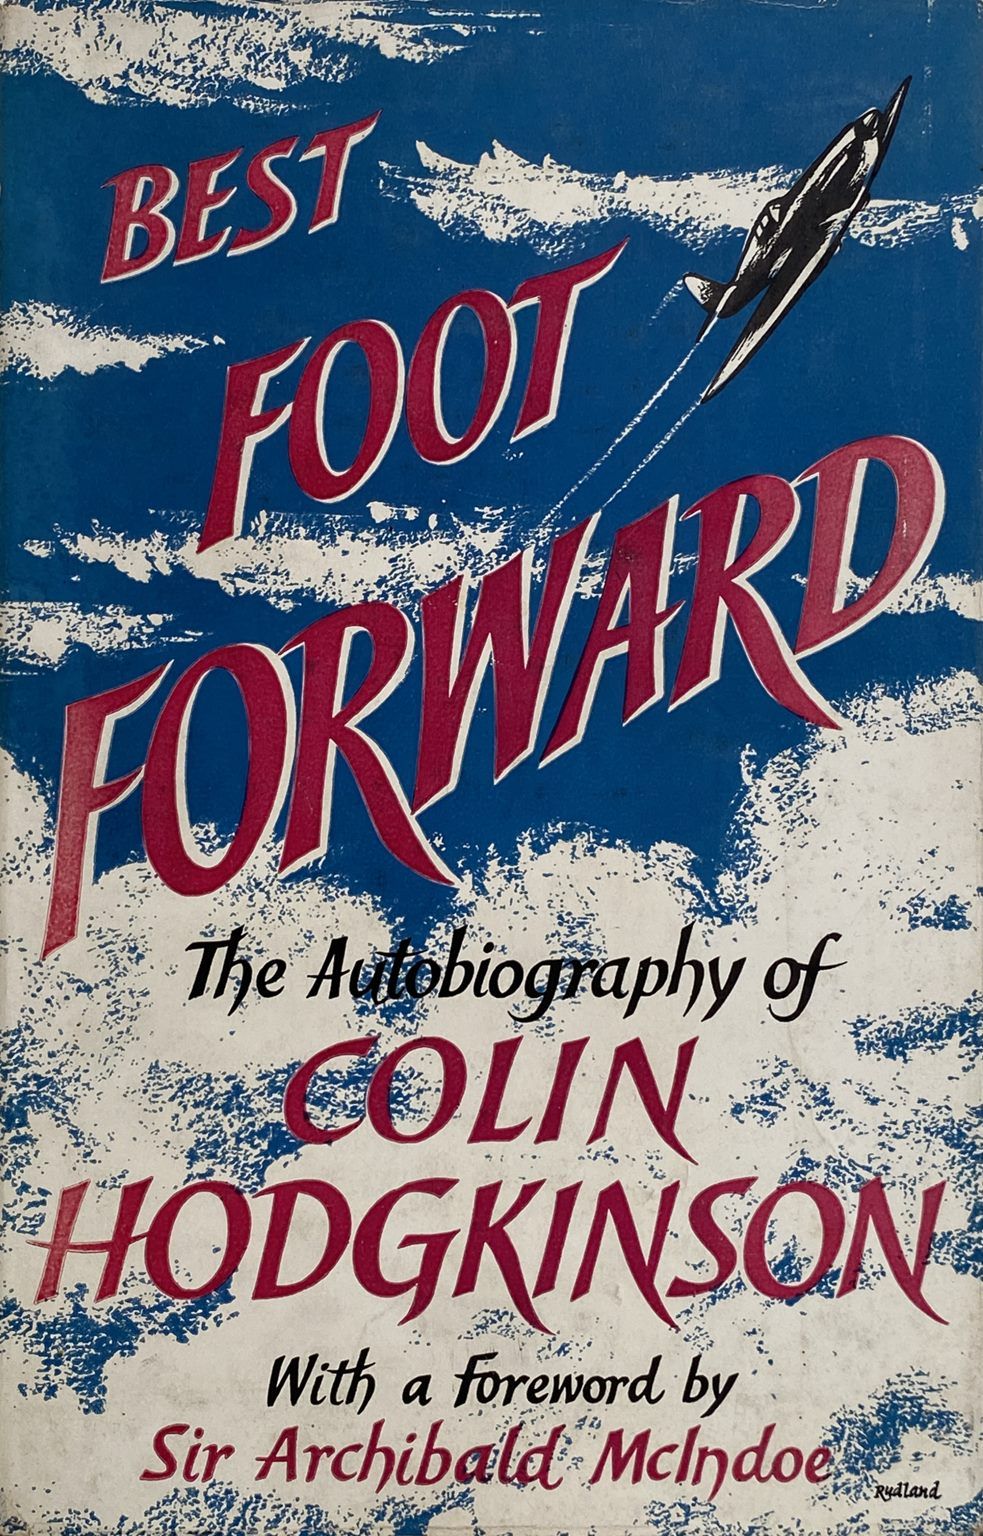 BEST FOOT FORWARD: The Autobiography of Colin Hodgkinson